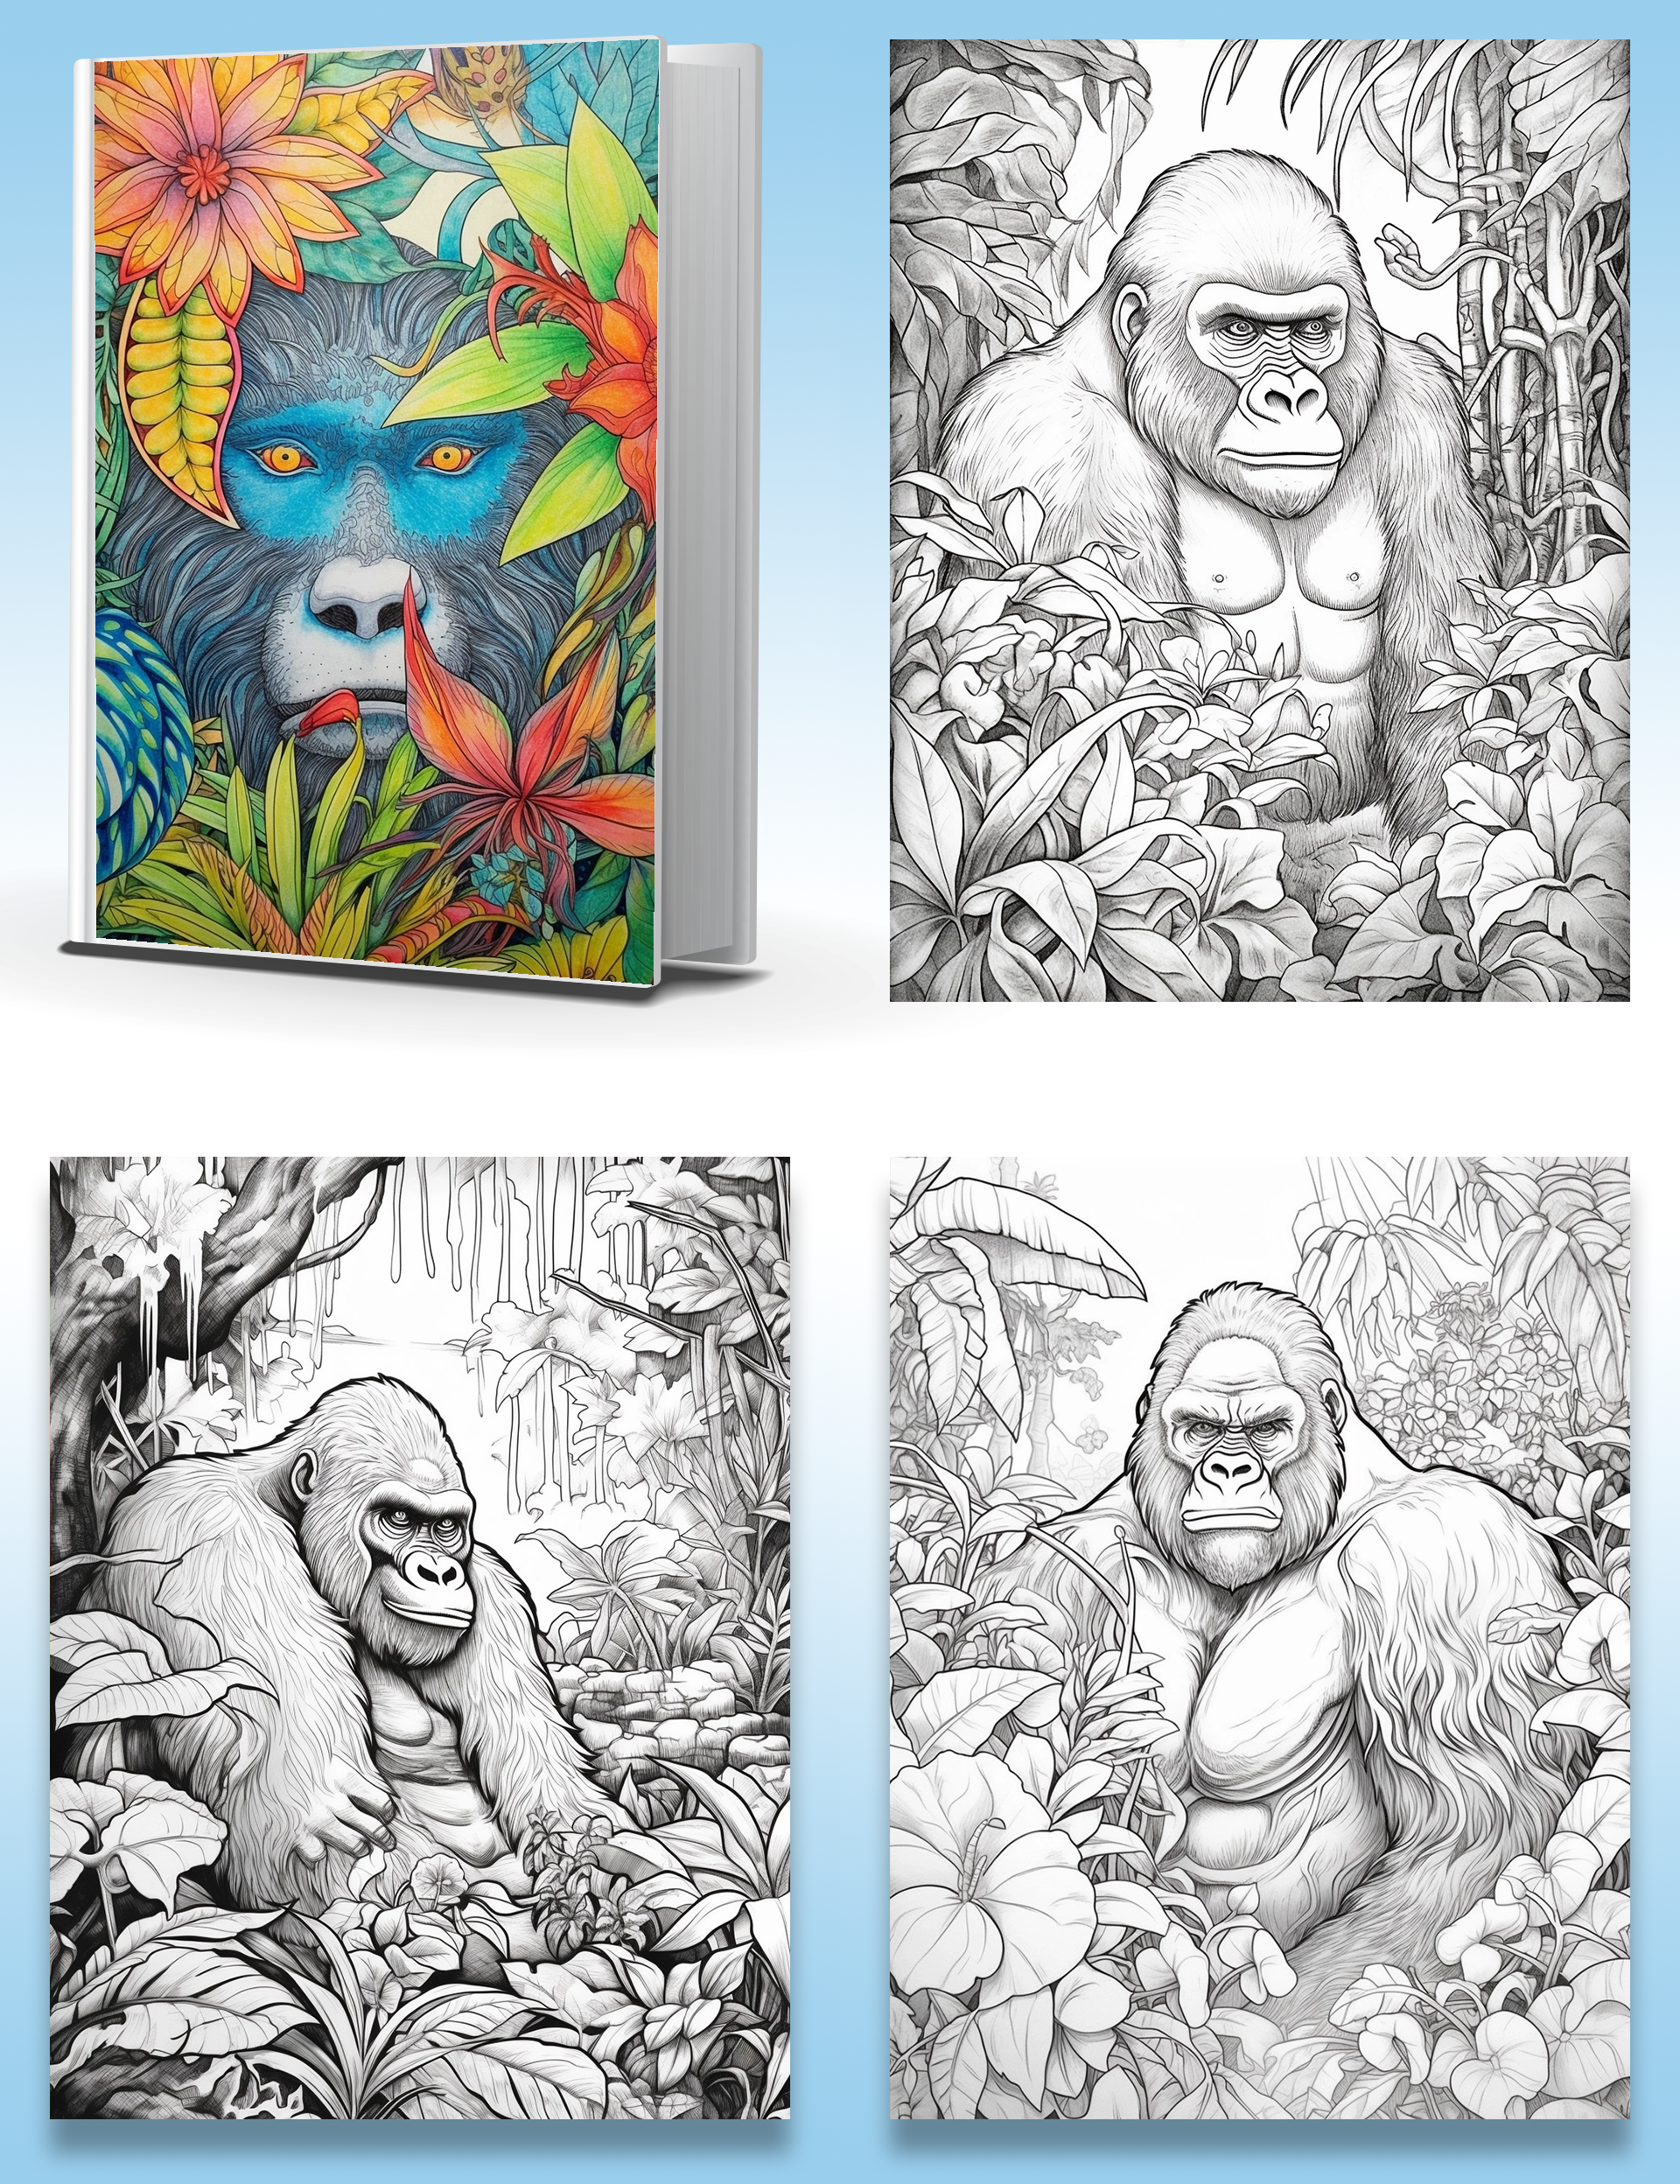 Unleash Your Creativity and Color the Magnificence of the Jungle's Mightiest Primates!